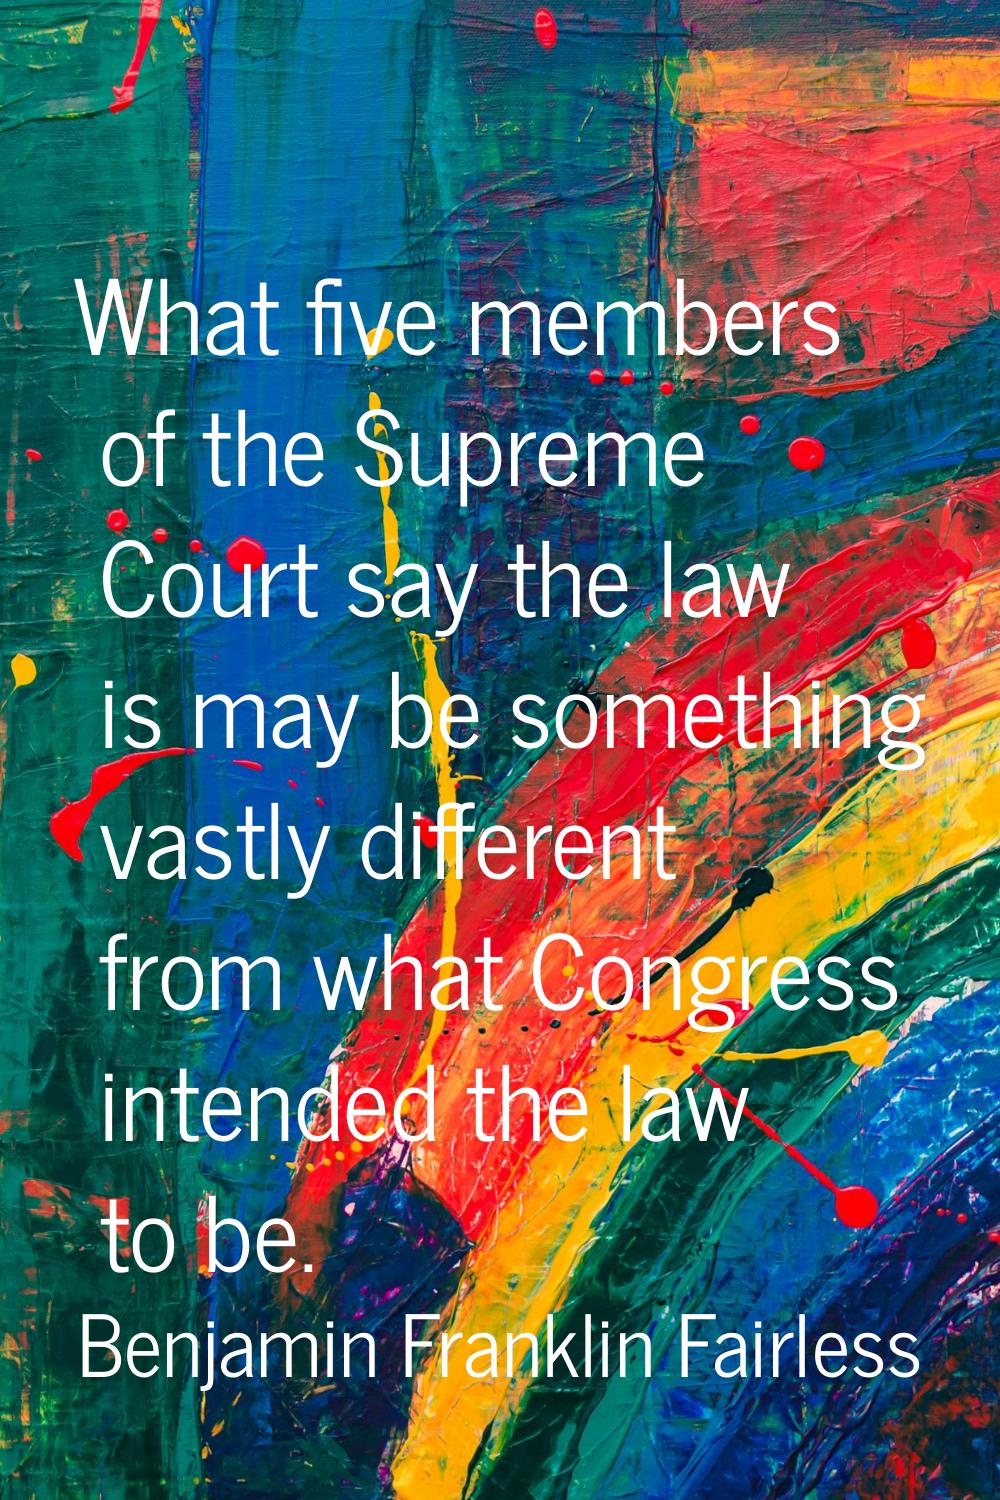 What five members of the Supreme Court say the law is may be something vastly different from what C